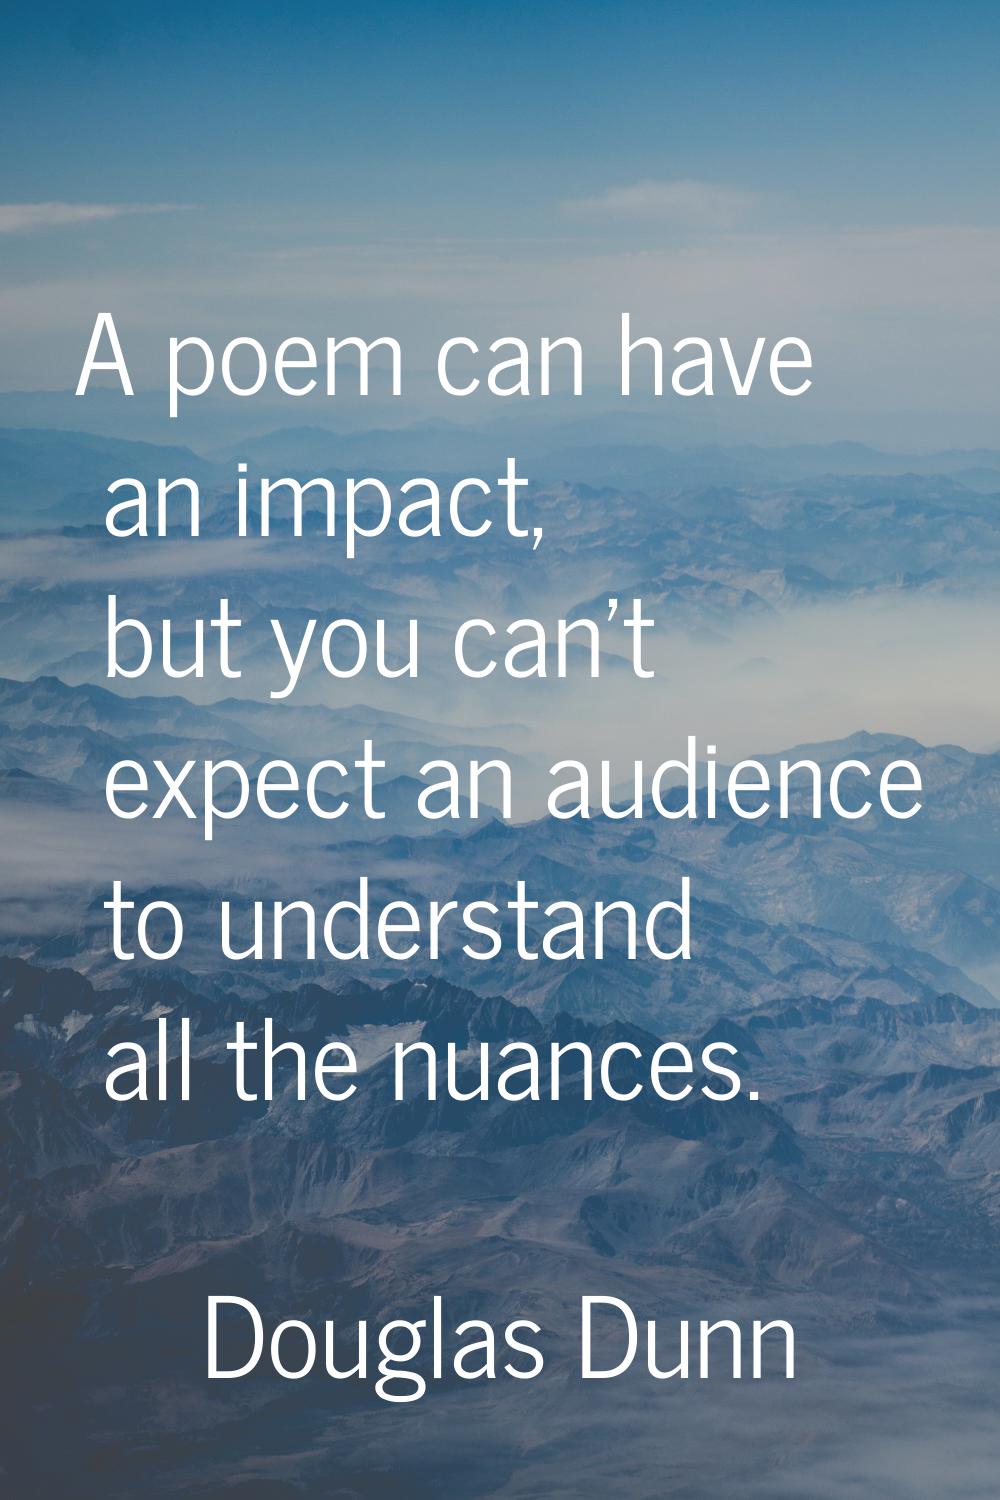 A poem can have an impact, but you can't expect an audience to understand all the nuances.